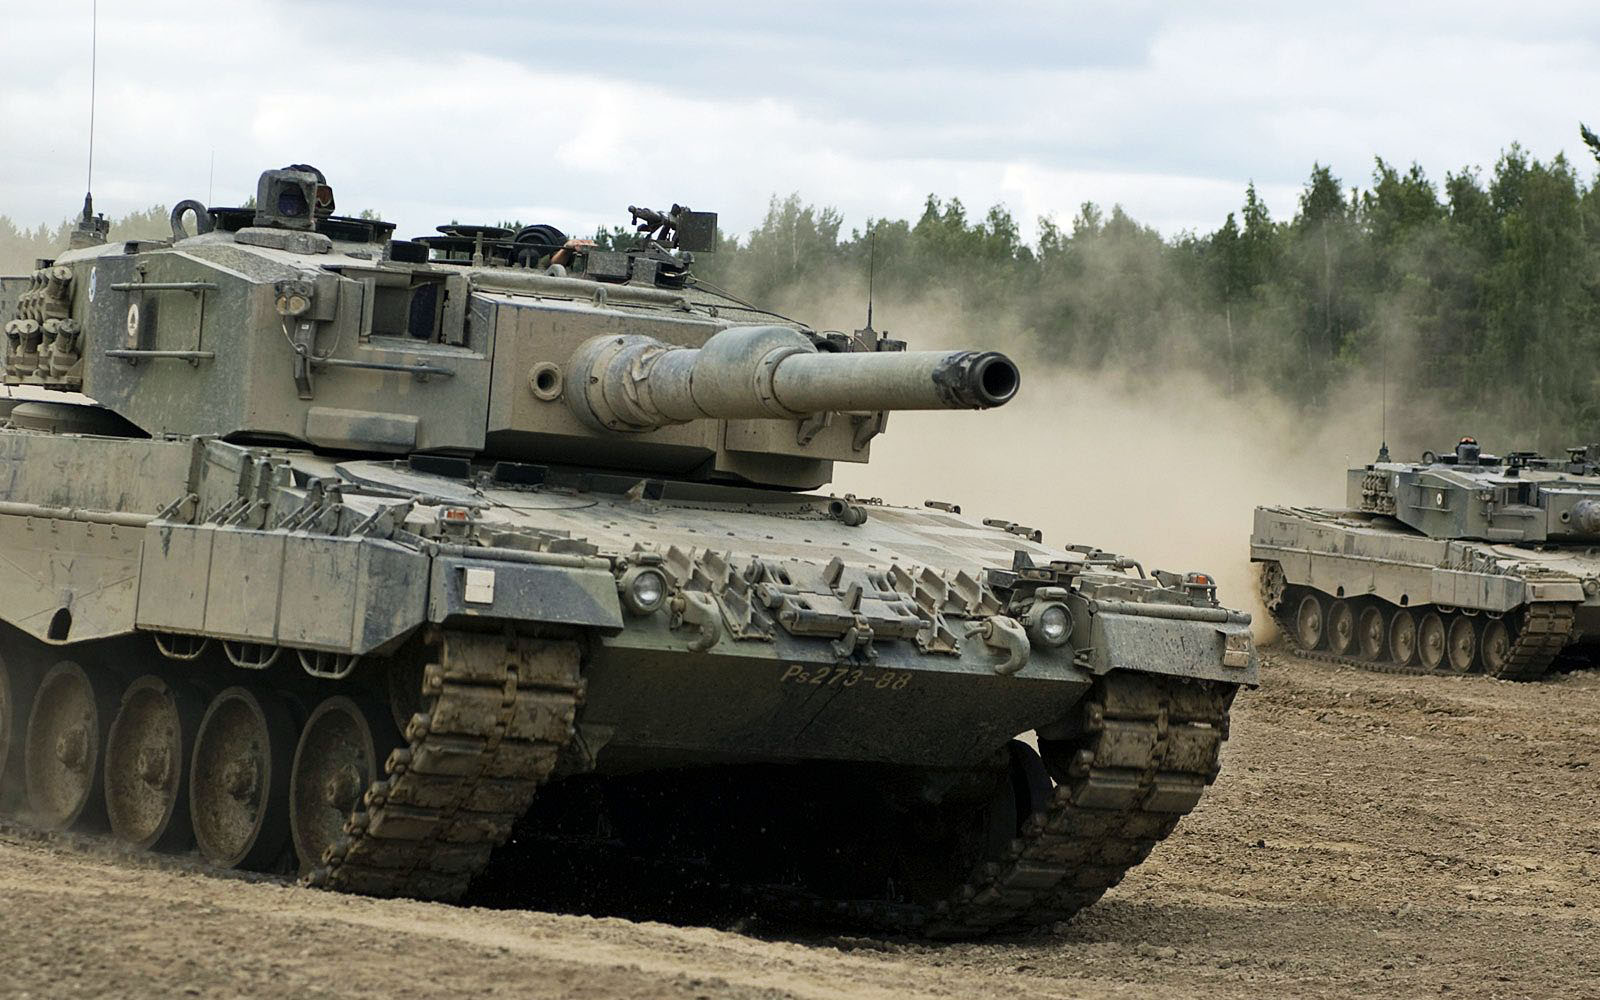 Watch: Leopard 2 Tanks Seen Perform Military Drills in Hungary